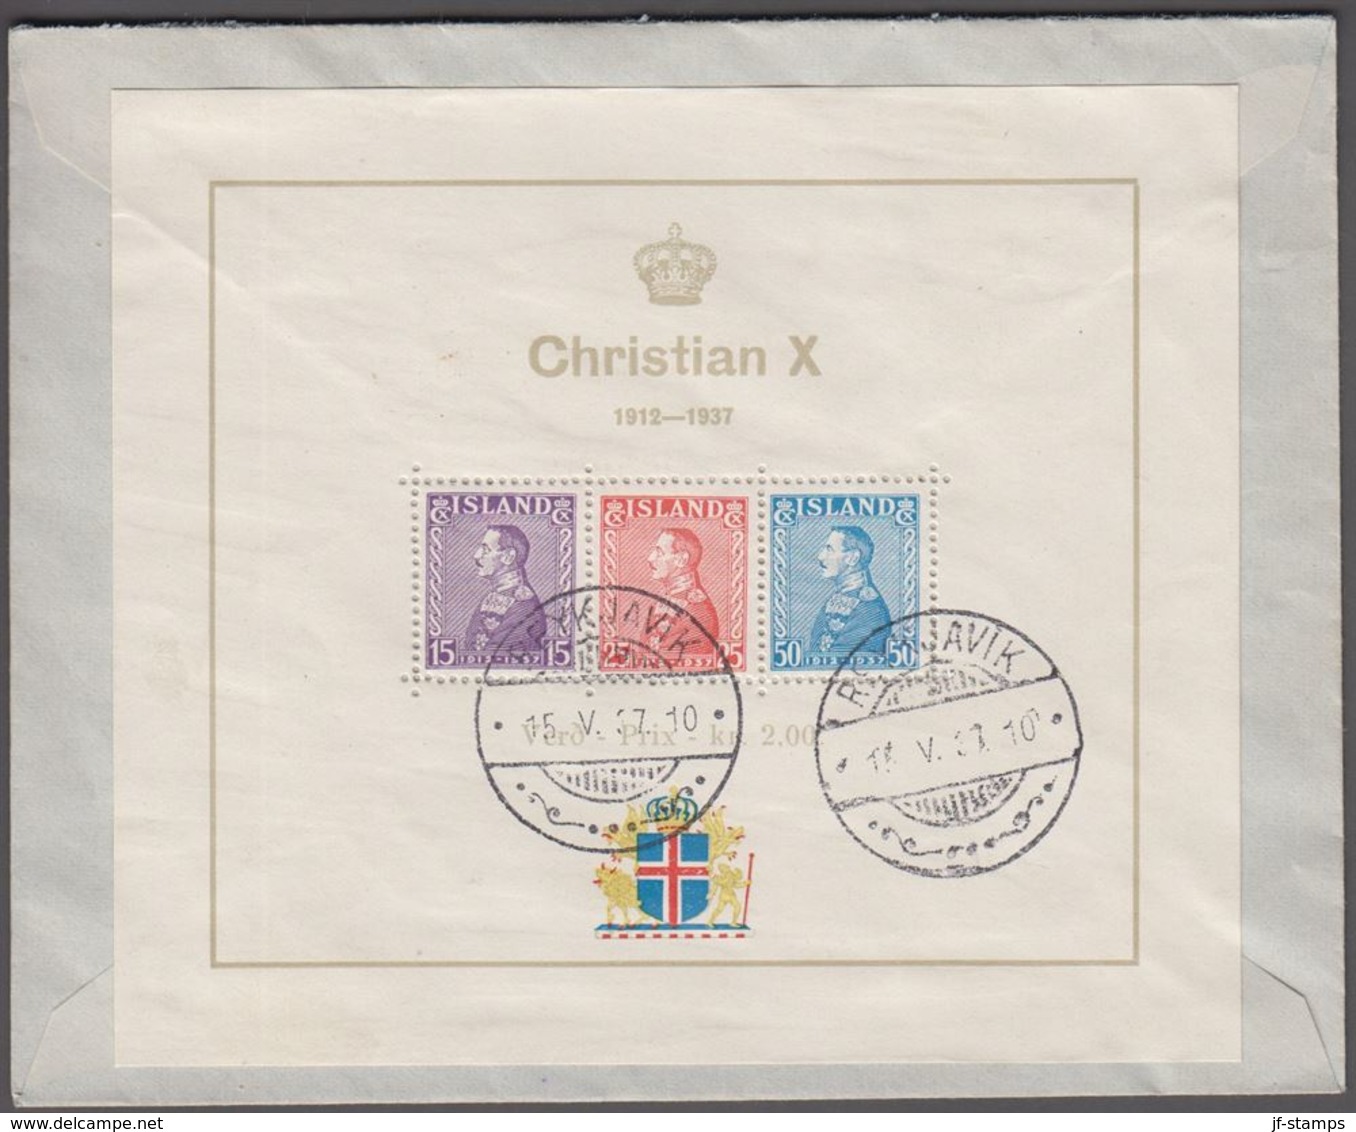 1937. Silver Jubilee Block Only 55.000 Issued. REYKJAVIK 15. V. 37. FDC Rare. (Michel 190-192 Bl. 1) - JF365076 - Covers & Documents